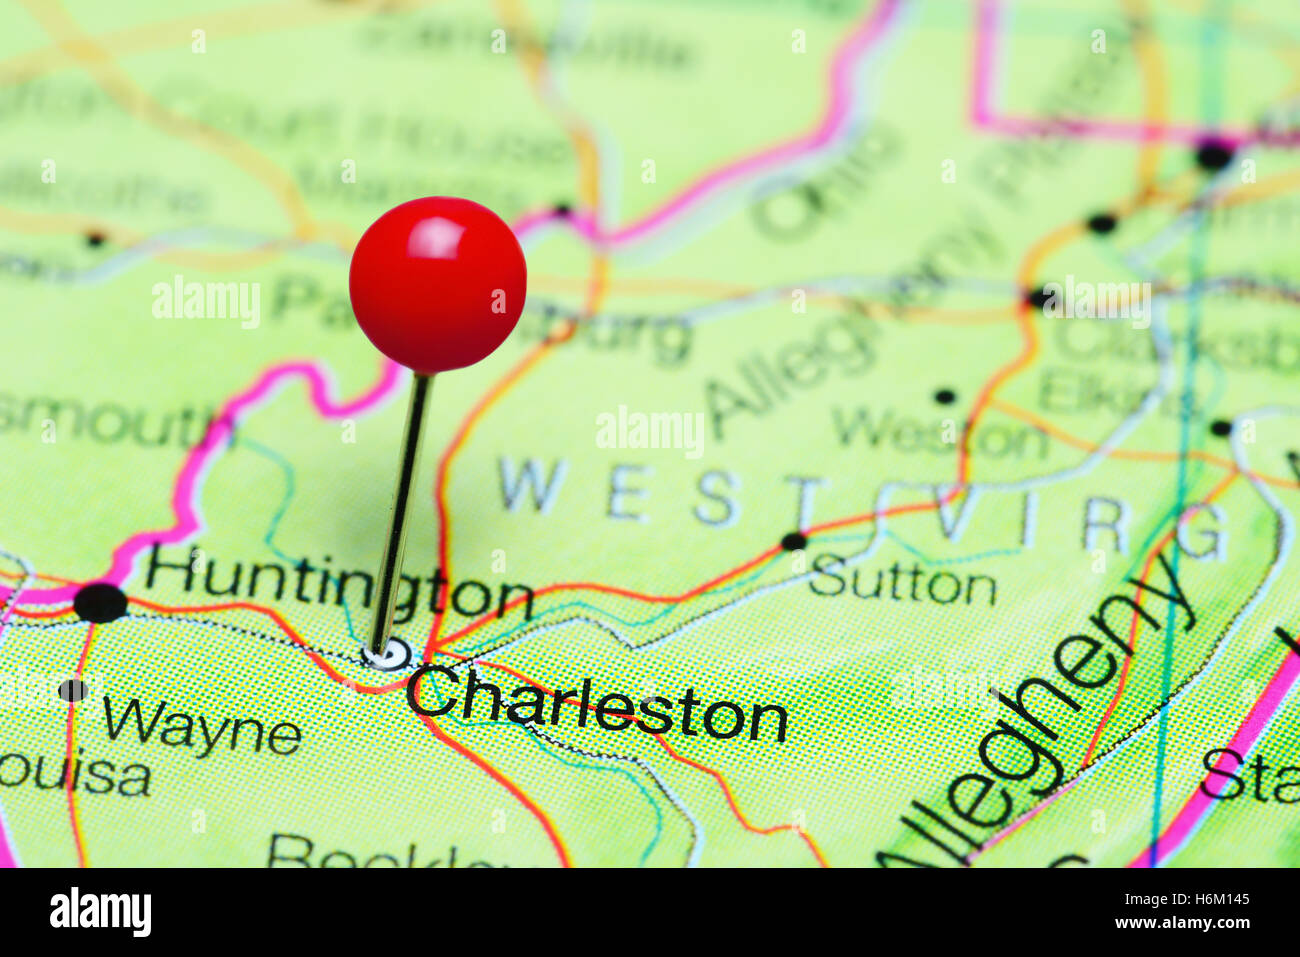 Charleston pinned on a map of West Virginia, USA Stock Photo